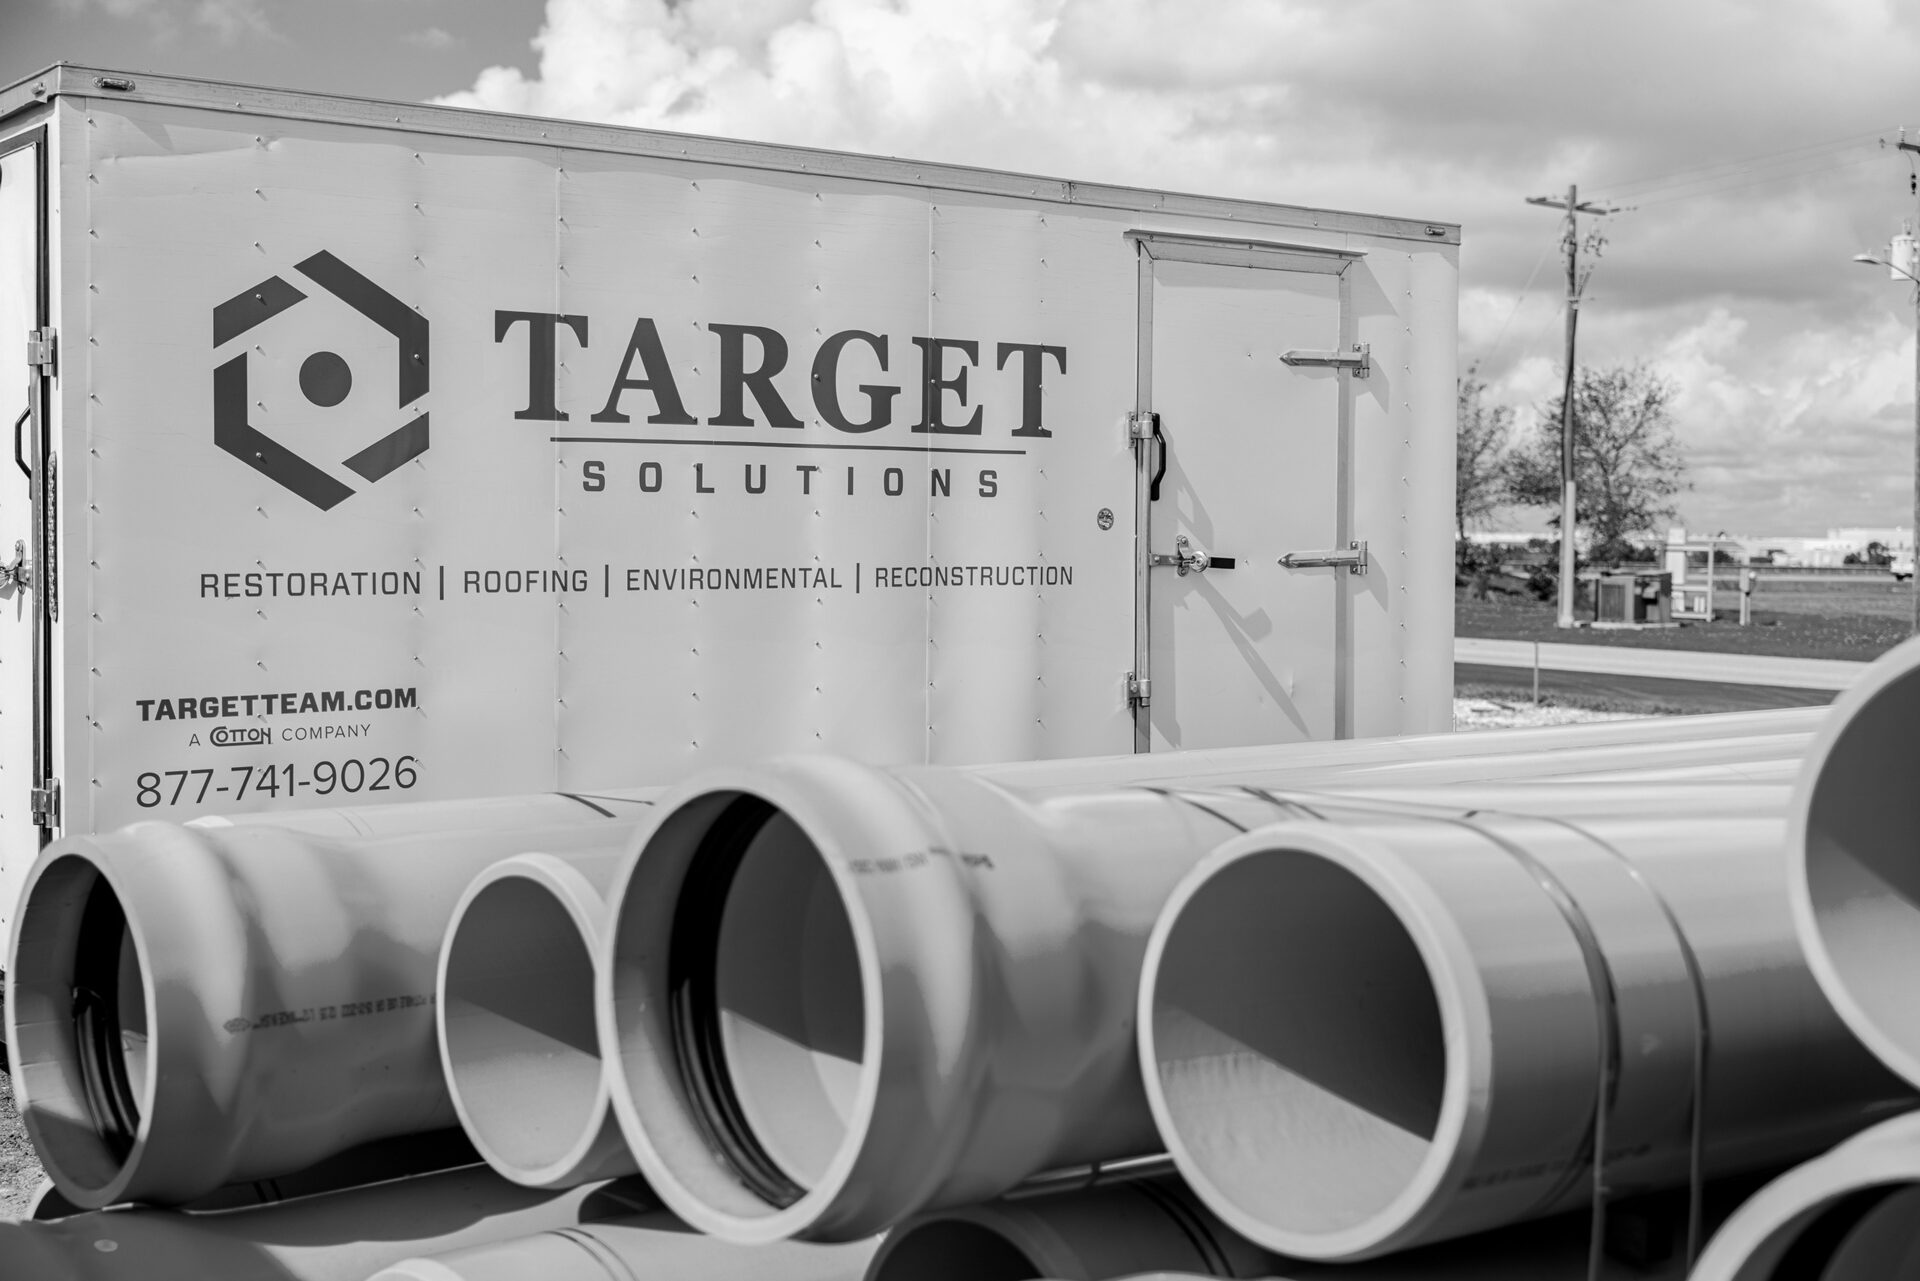 Large pipes in front of a Target Solution trailer